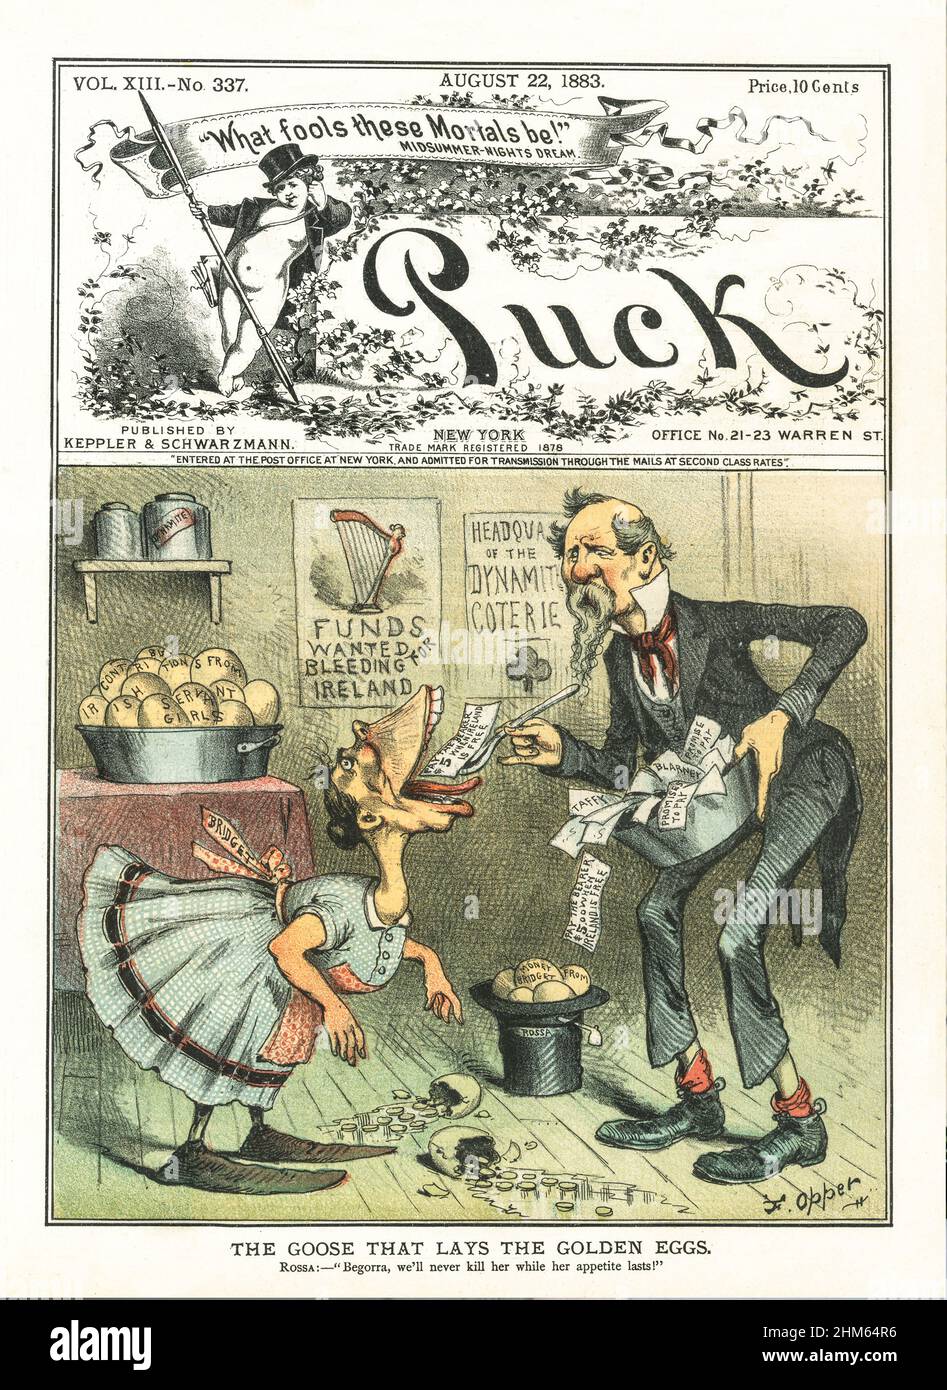 A late 19th century American Puck Magazine cover with a cartoon of Jeremiah O'Donovan Rossa spoon-feeding a promissory note that states 'Pay the Bearer $5 When Ireland is Free' to an Irish servant girl labelled 'Bridget'. On the floor between them is a hat labelled 'Rossa' filled with golden eggs labelled 'Money from Bridget', but broken eggs spill coins on the floor. On a table to the left is a bowl filled with golden eggs labelled 'Irish Contributions from Servant Girls', and hanging on the wall at center are notices about Ireland' . Stock Photo